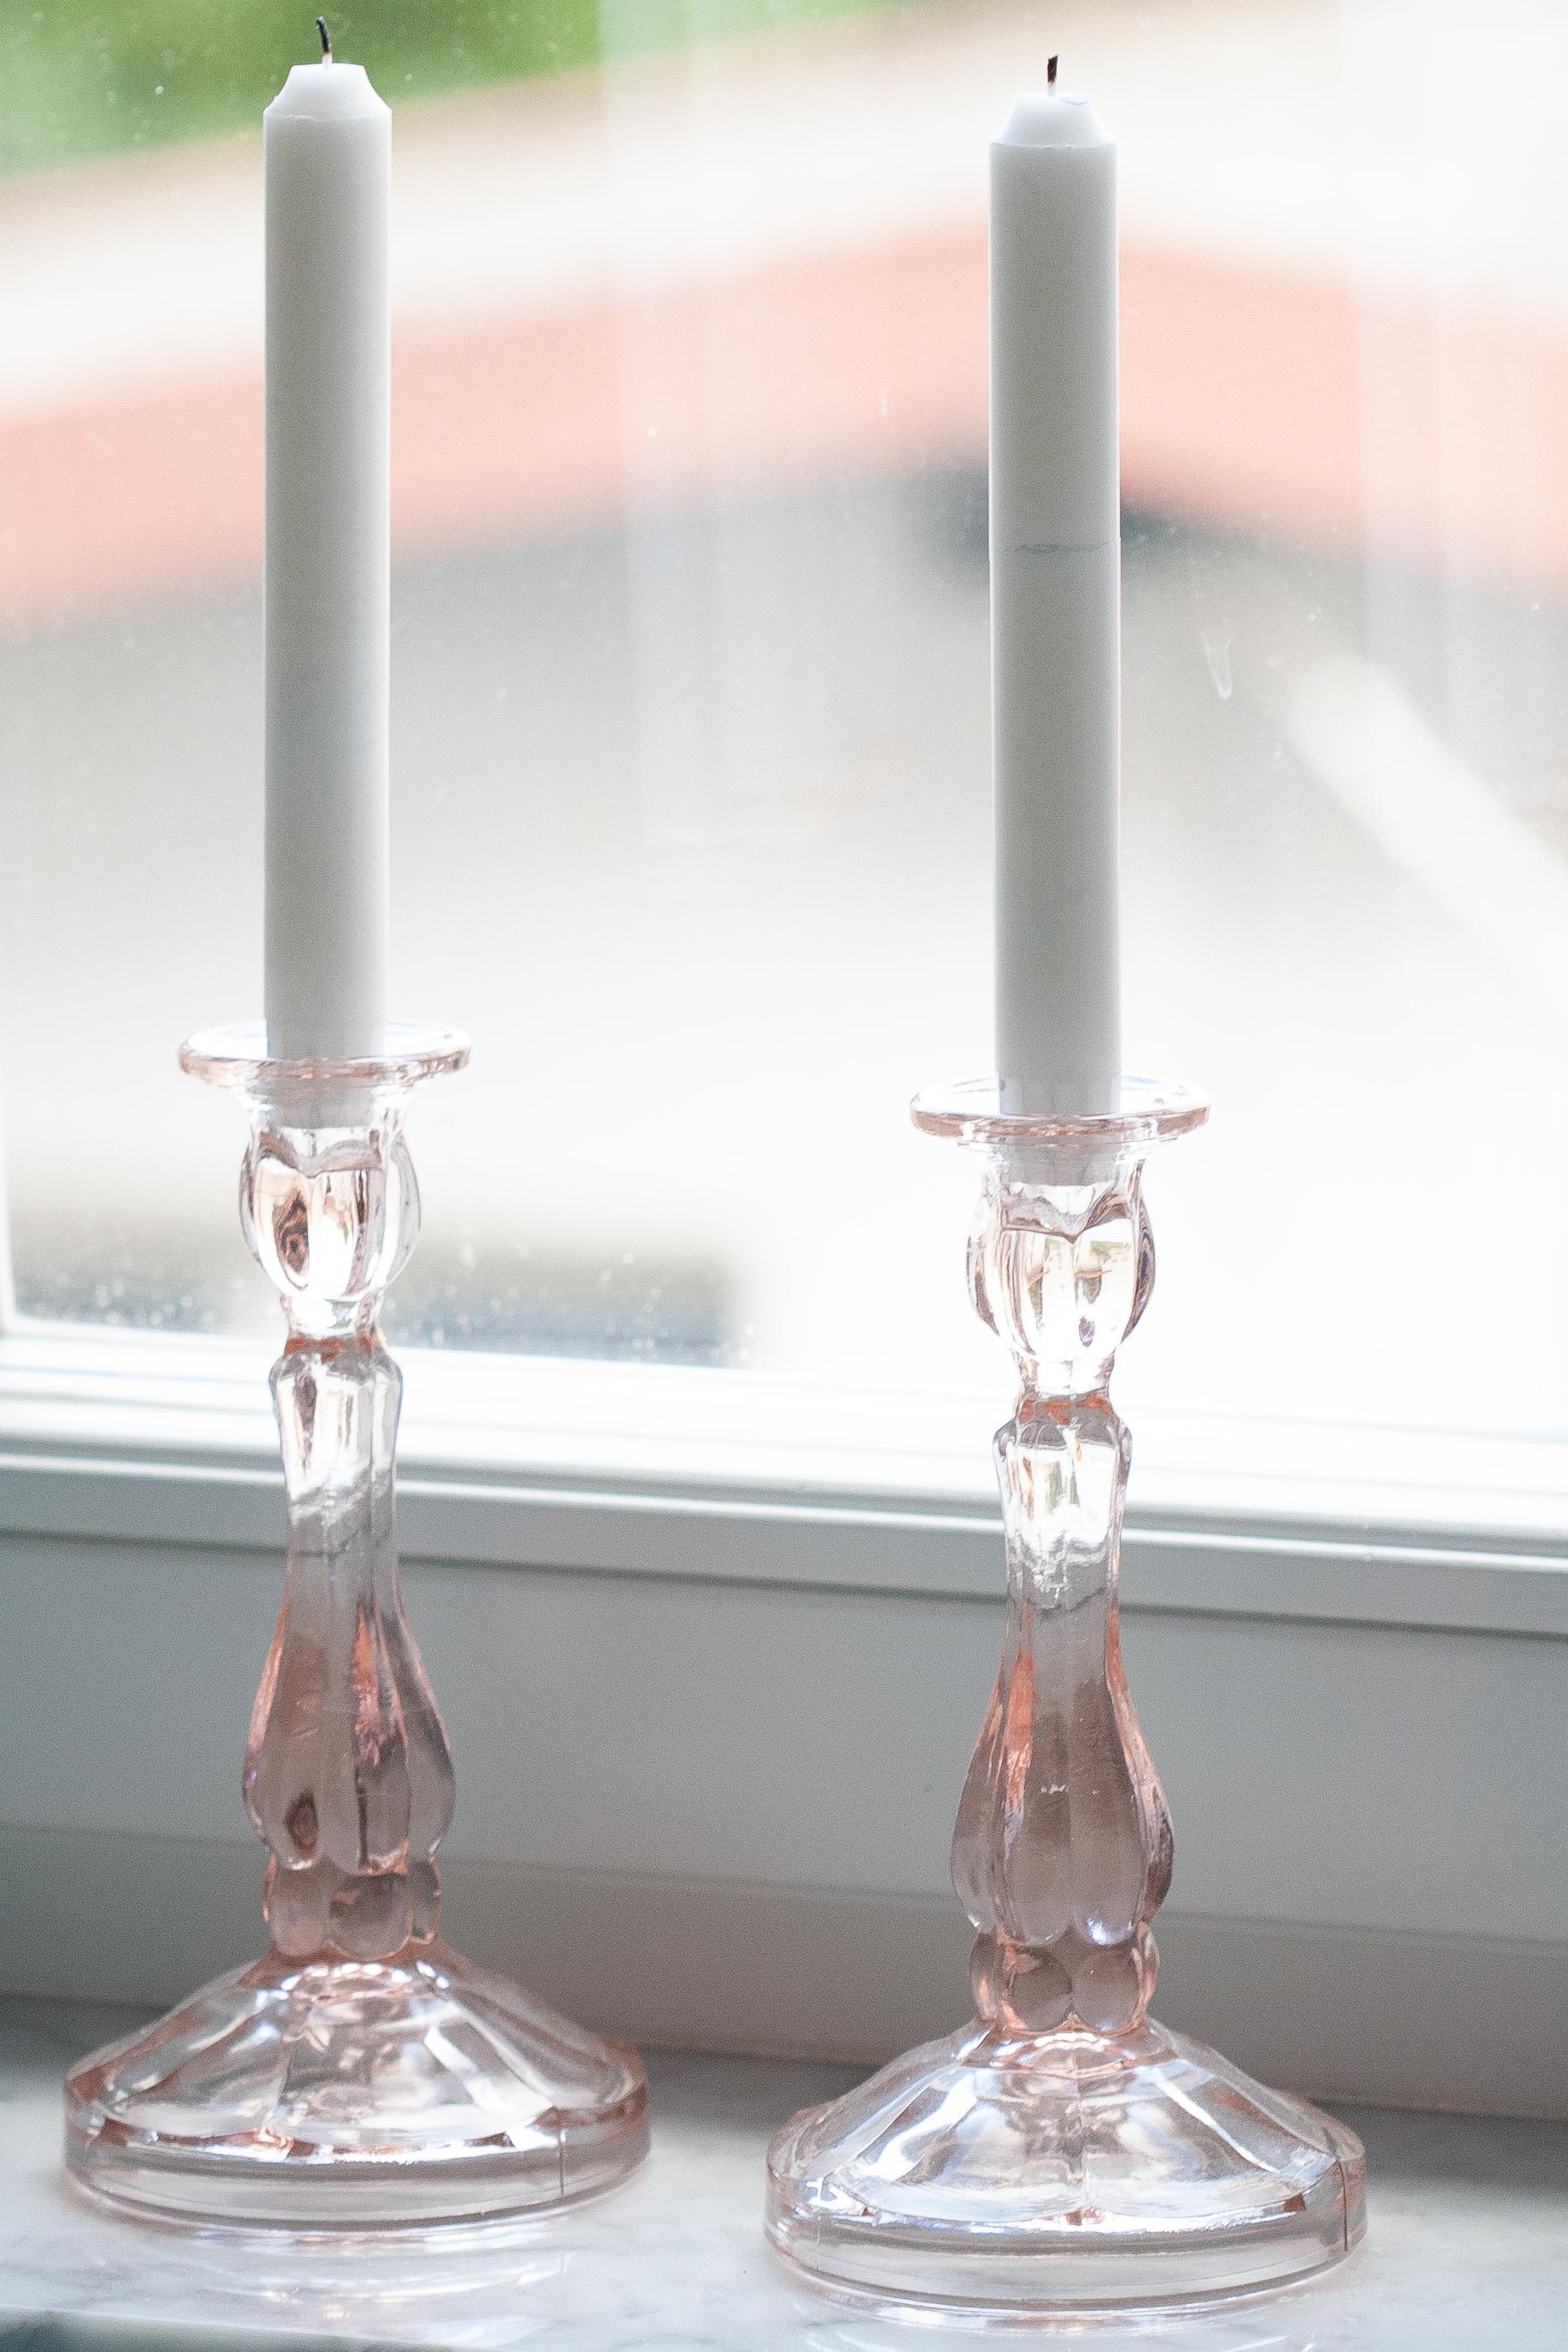 Set of two midcentury Polish modern glass candlesticks, circa 1960. 
Very good condition. No damages. Beautiful light pink glass.